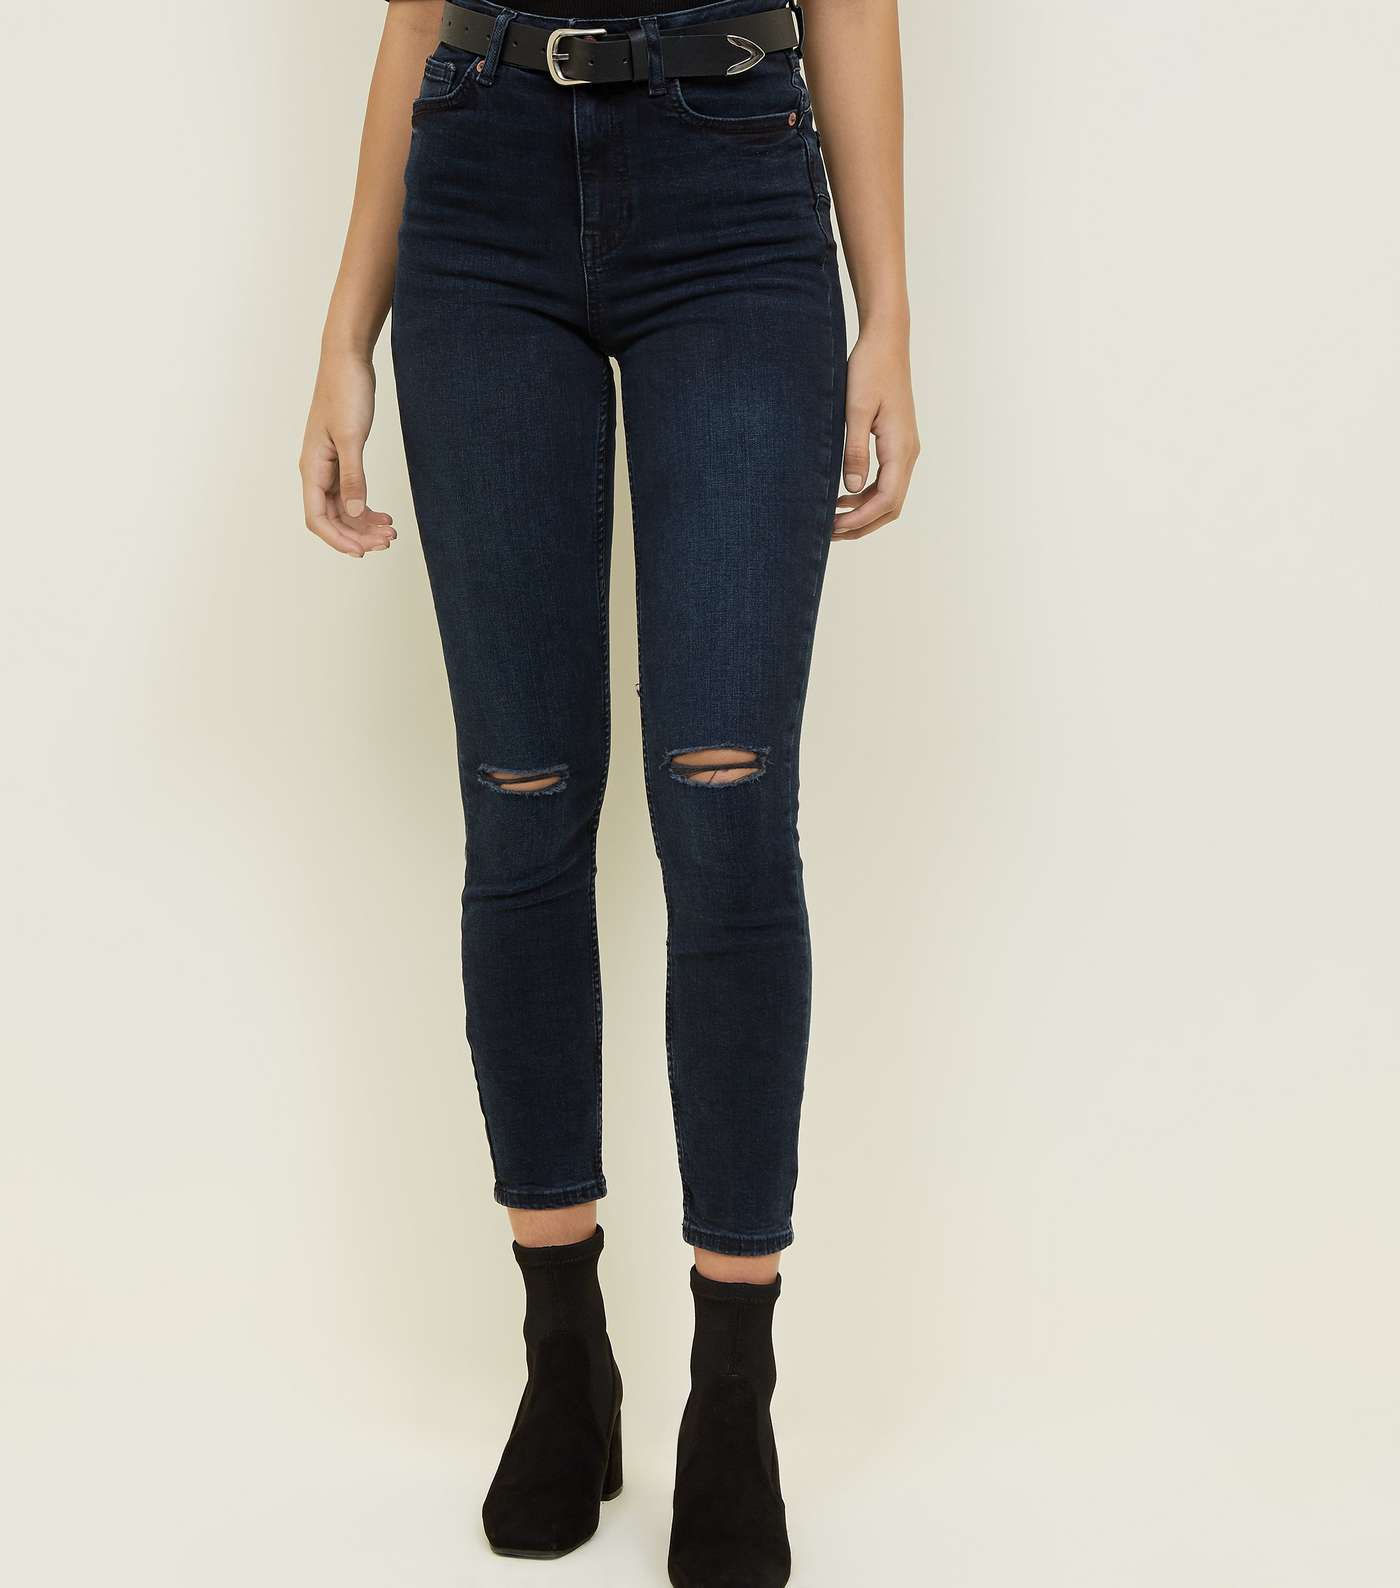 Navy Ripped Super Skinny 'Lift & Shape' Jeans Image 2